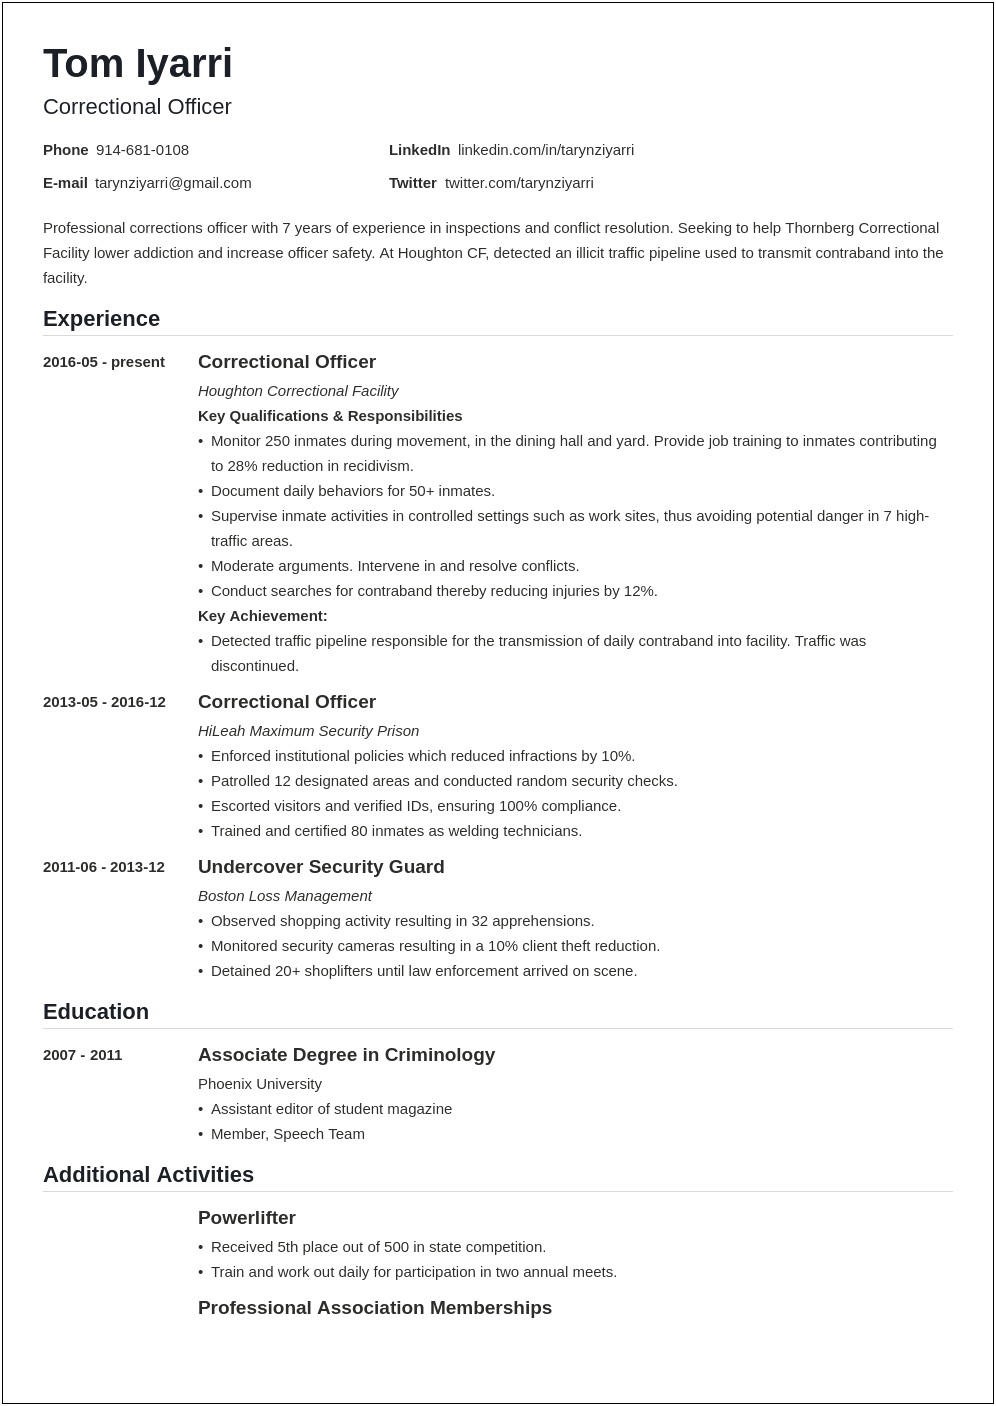 Resume Examples For Department Of Corrections